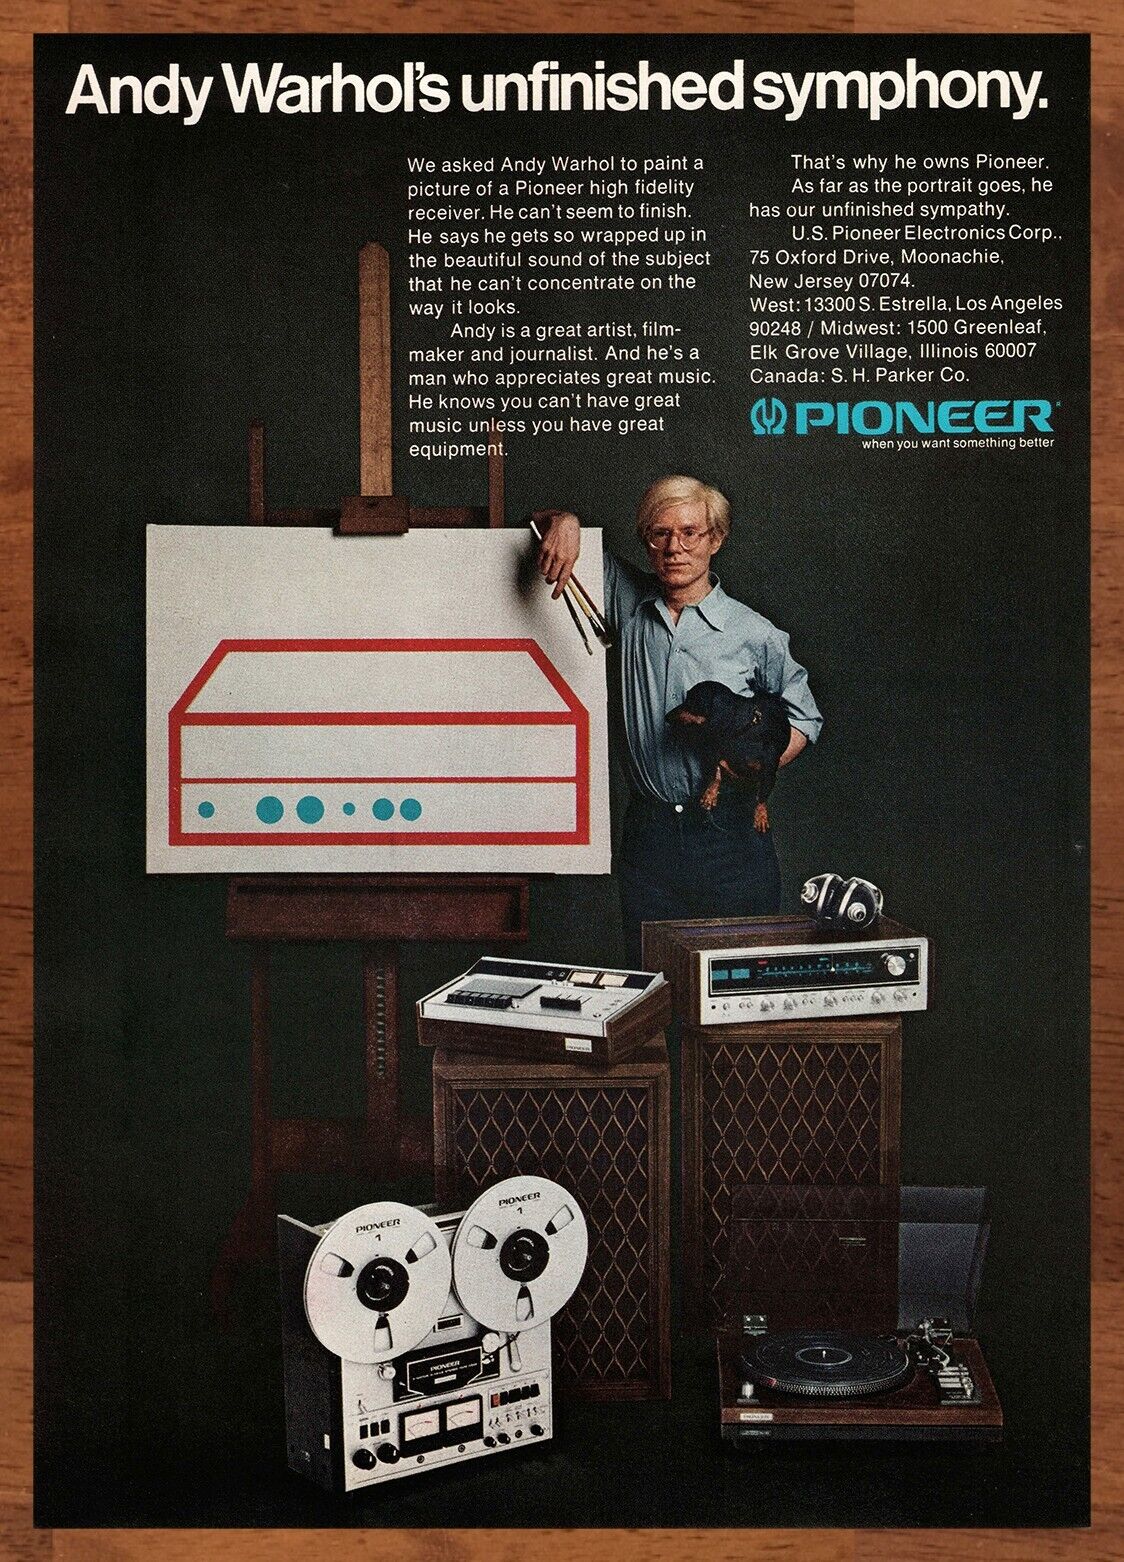 1975 Pioneer High Fidelity Receiver Vintage Print Ad/Poster 70s Man Cave Bar Art